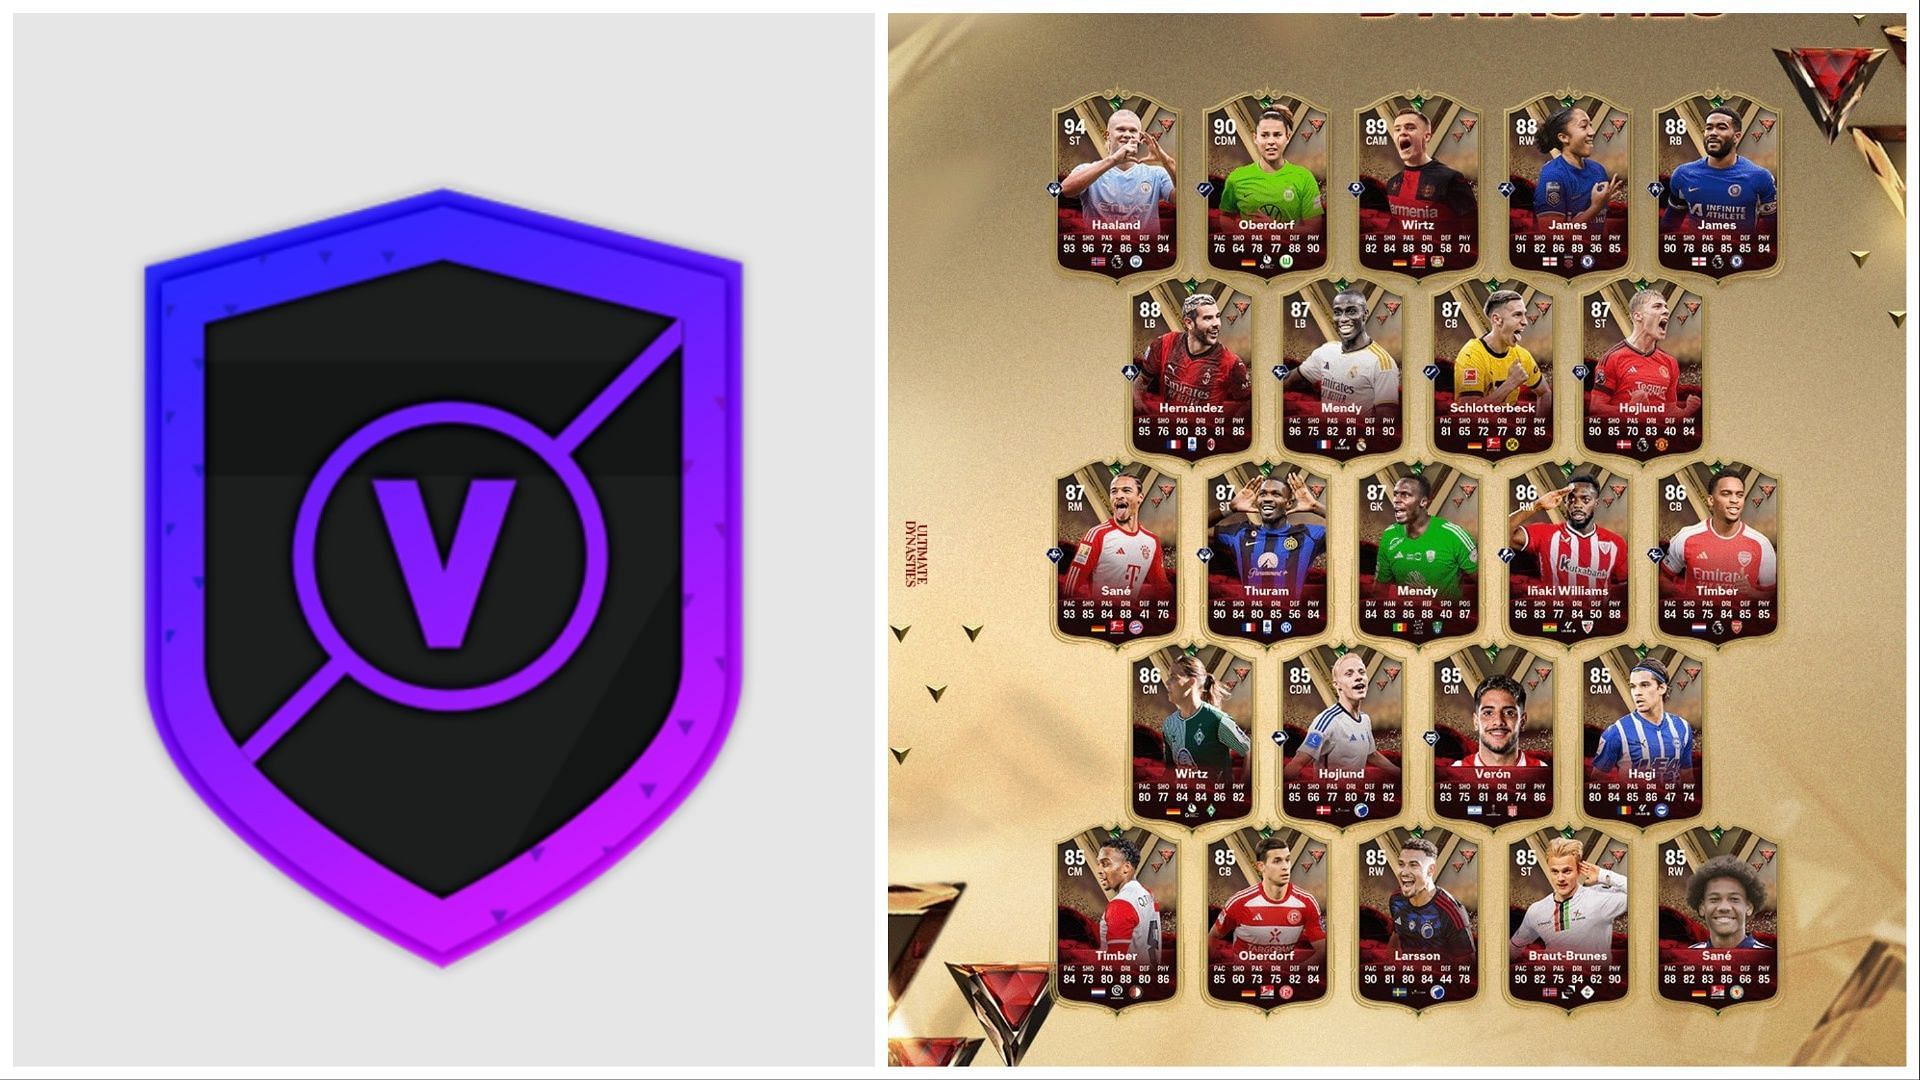 The latest set of UEFA Marquee Matchups are now live (Images via EA Sports)